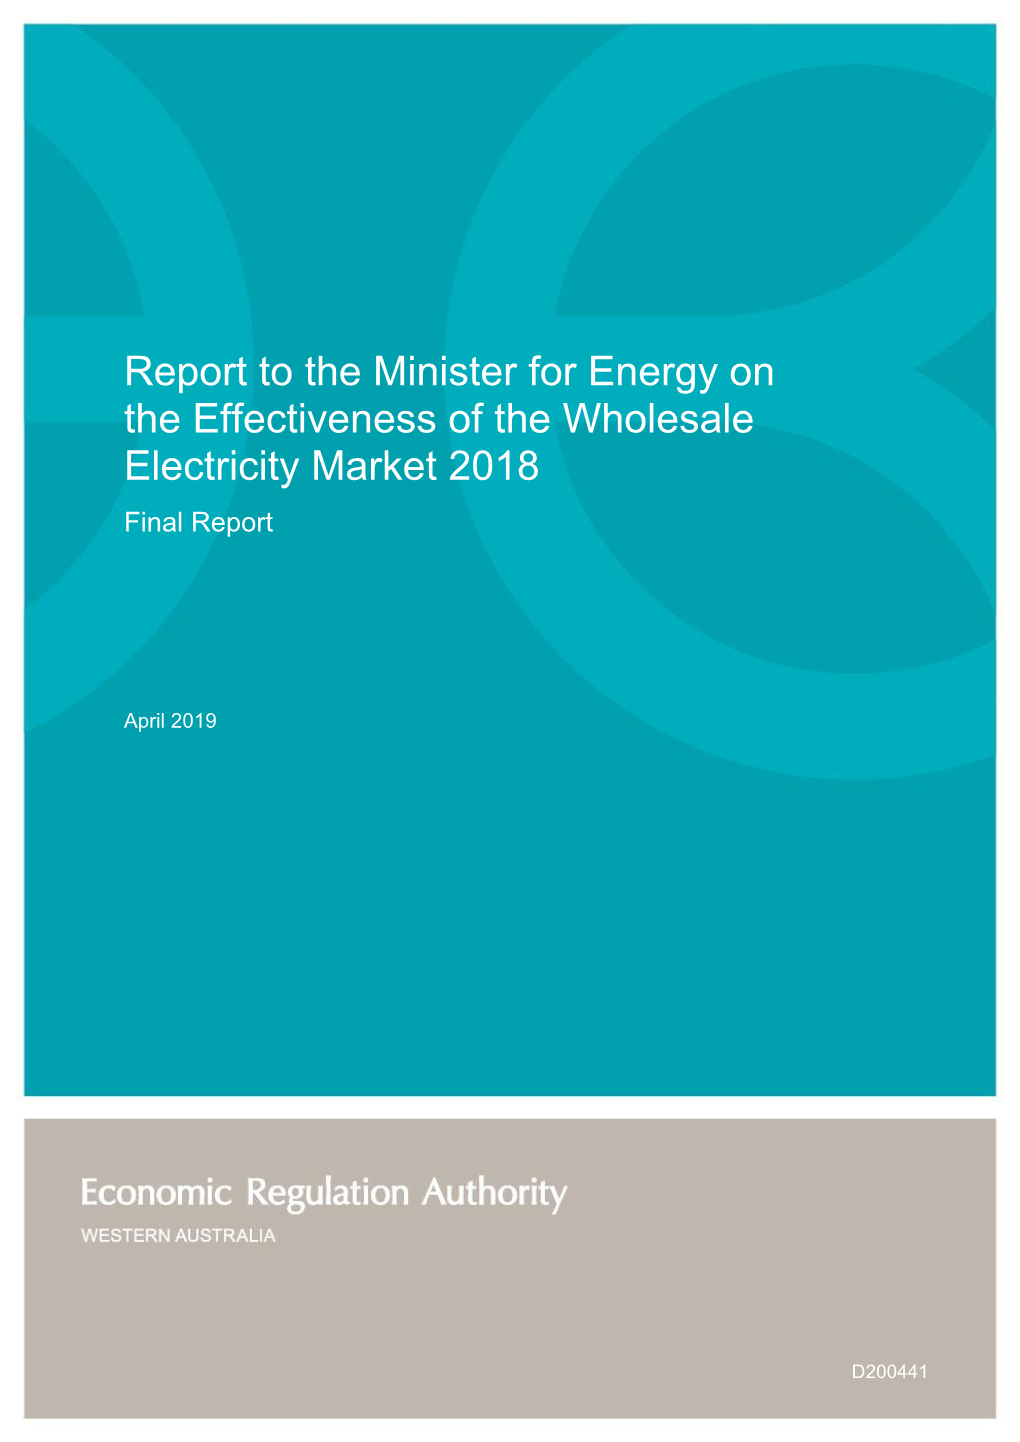 Report to the Minister for Energy on the Effectiveness of the Wholesale Electricity Market 2018 Final Report